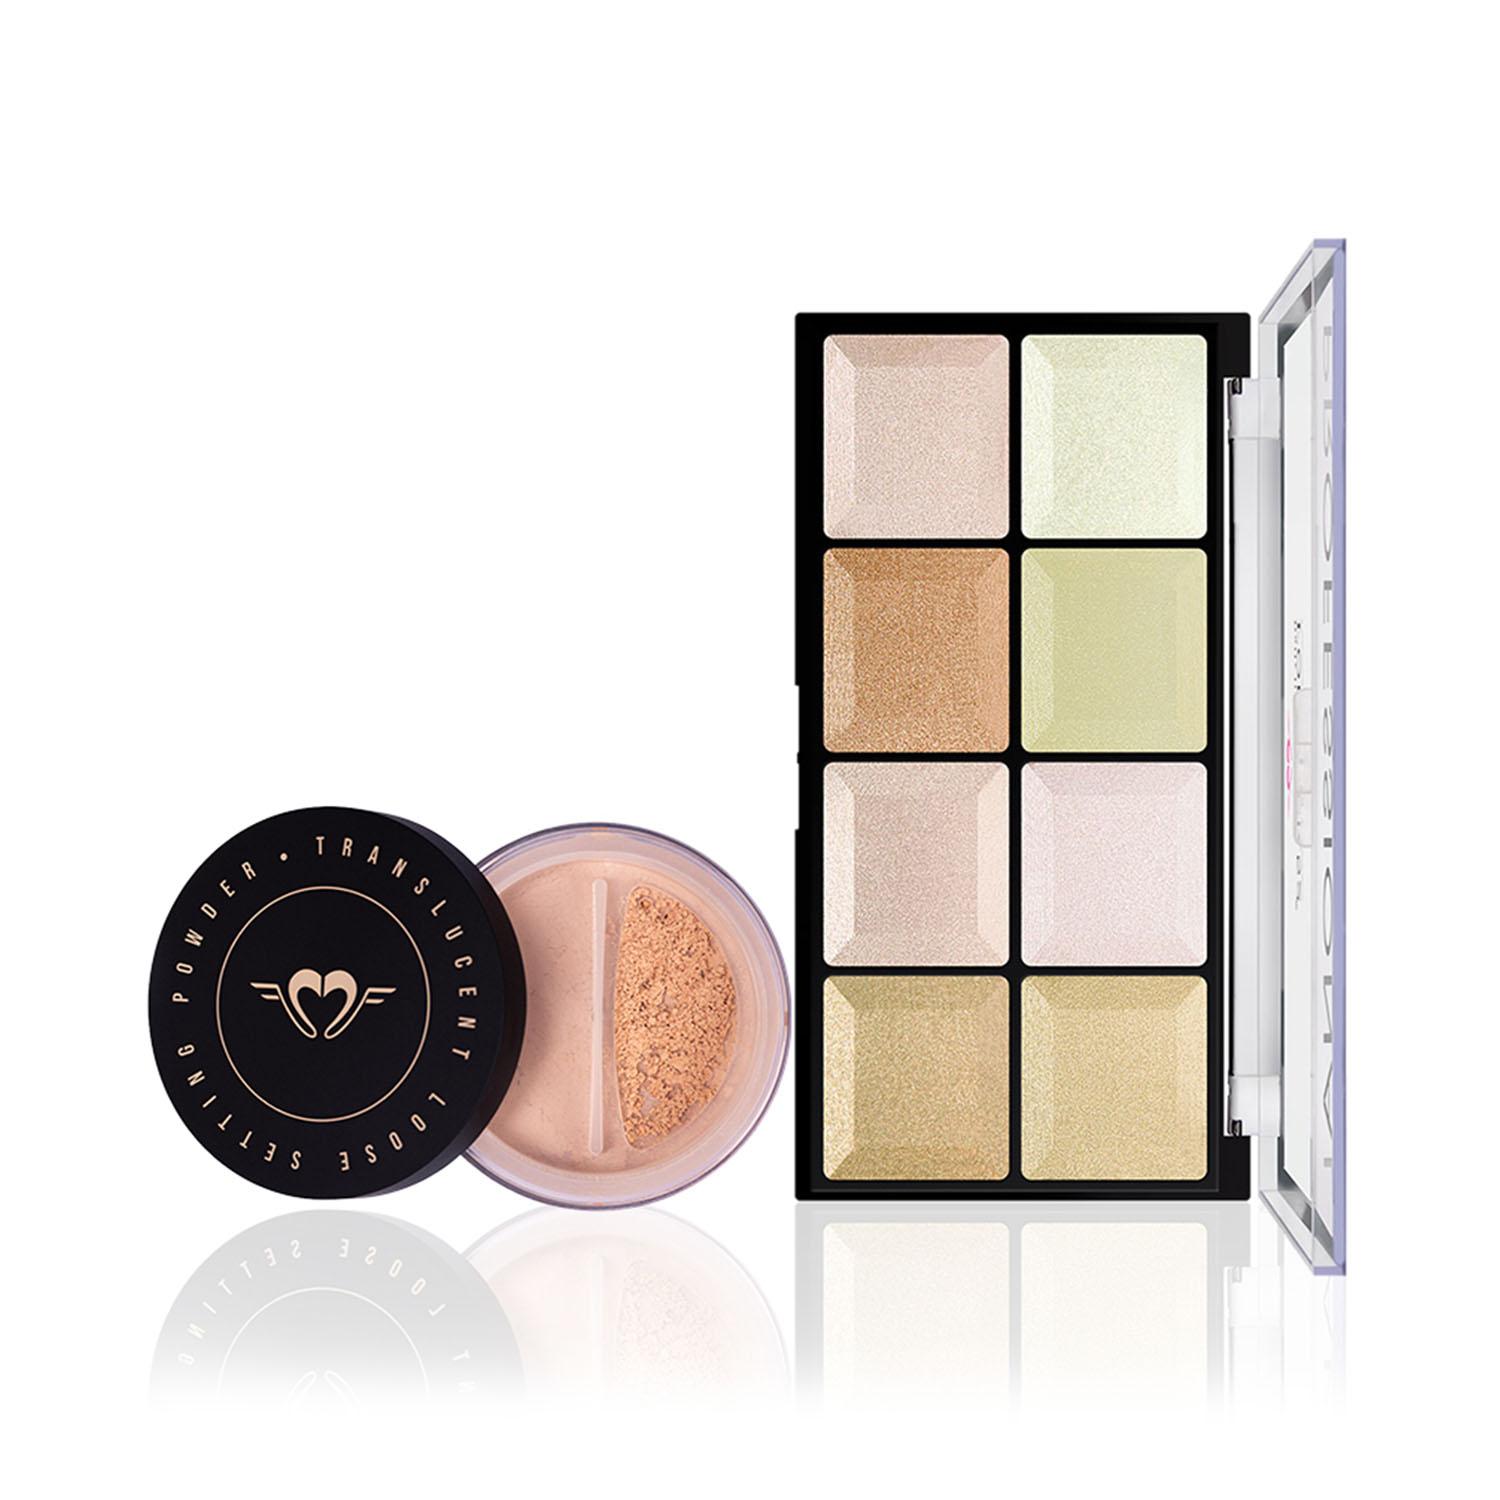 Daily Life Forever52 | Daily Life Forever52 Spotlight Highlighter Palette & Loose Setting Powder Combo (Buff Beige TLM010)